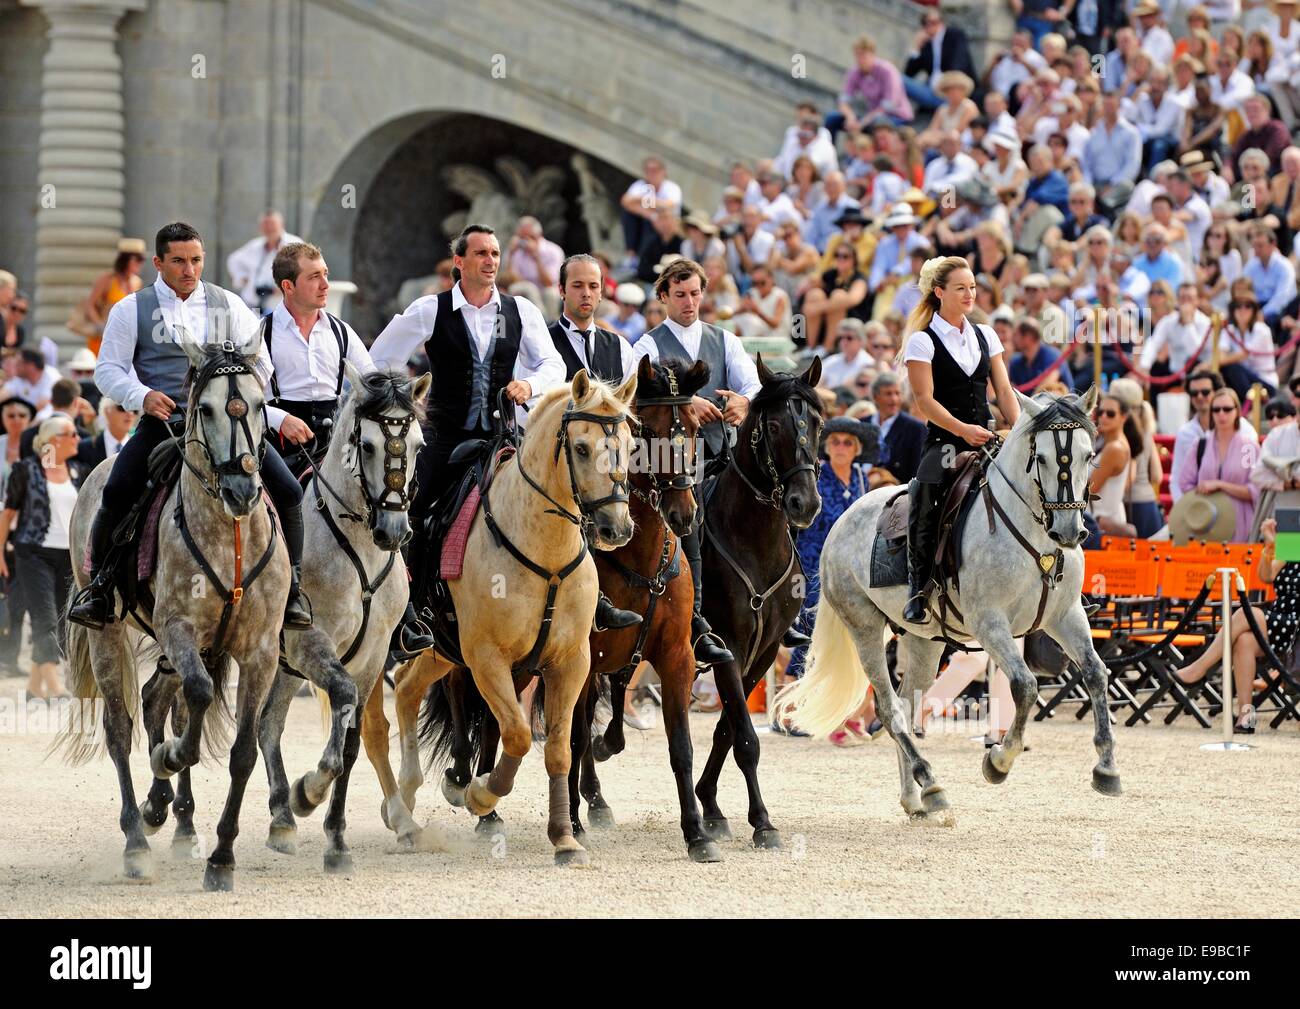 An equestrian team canter into an arena to give a display of stunt riding and horsemanship Stock Photo